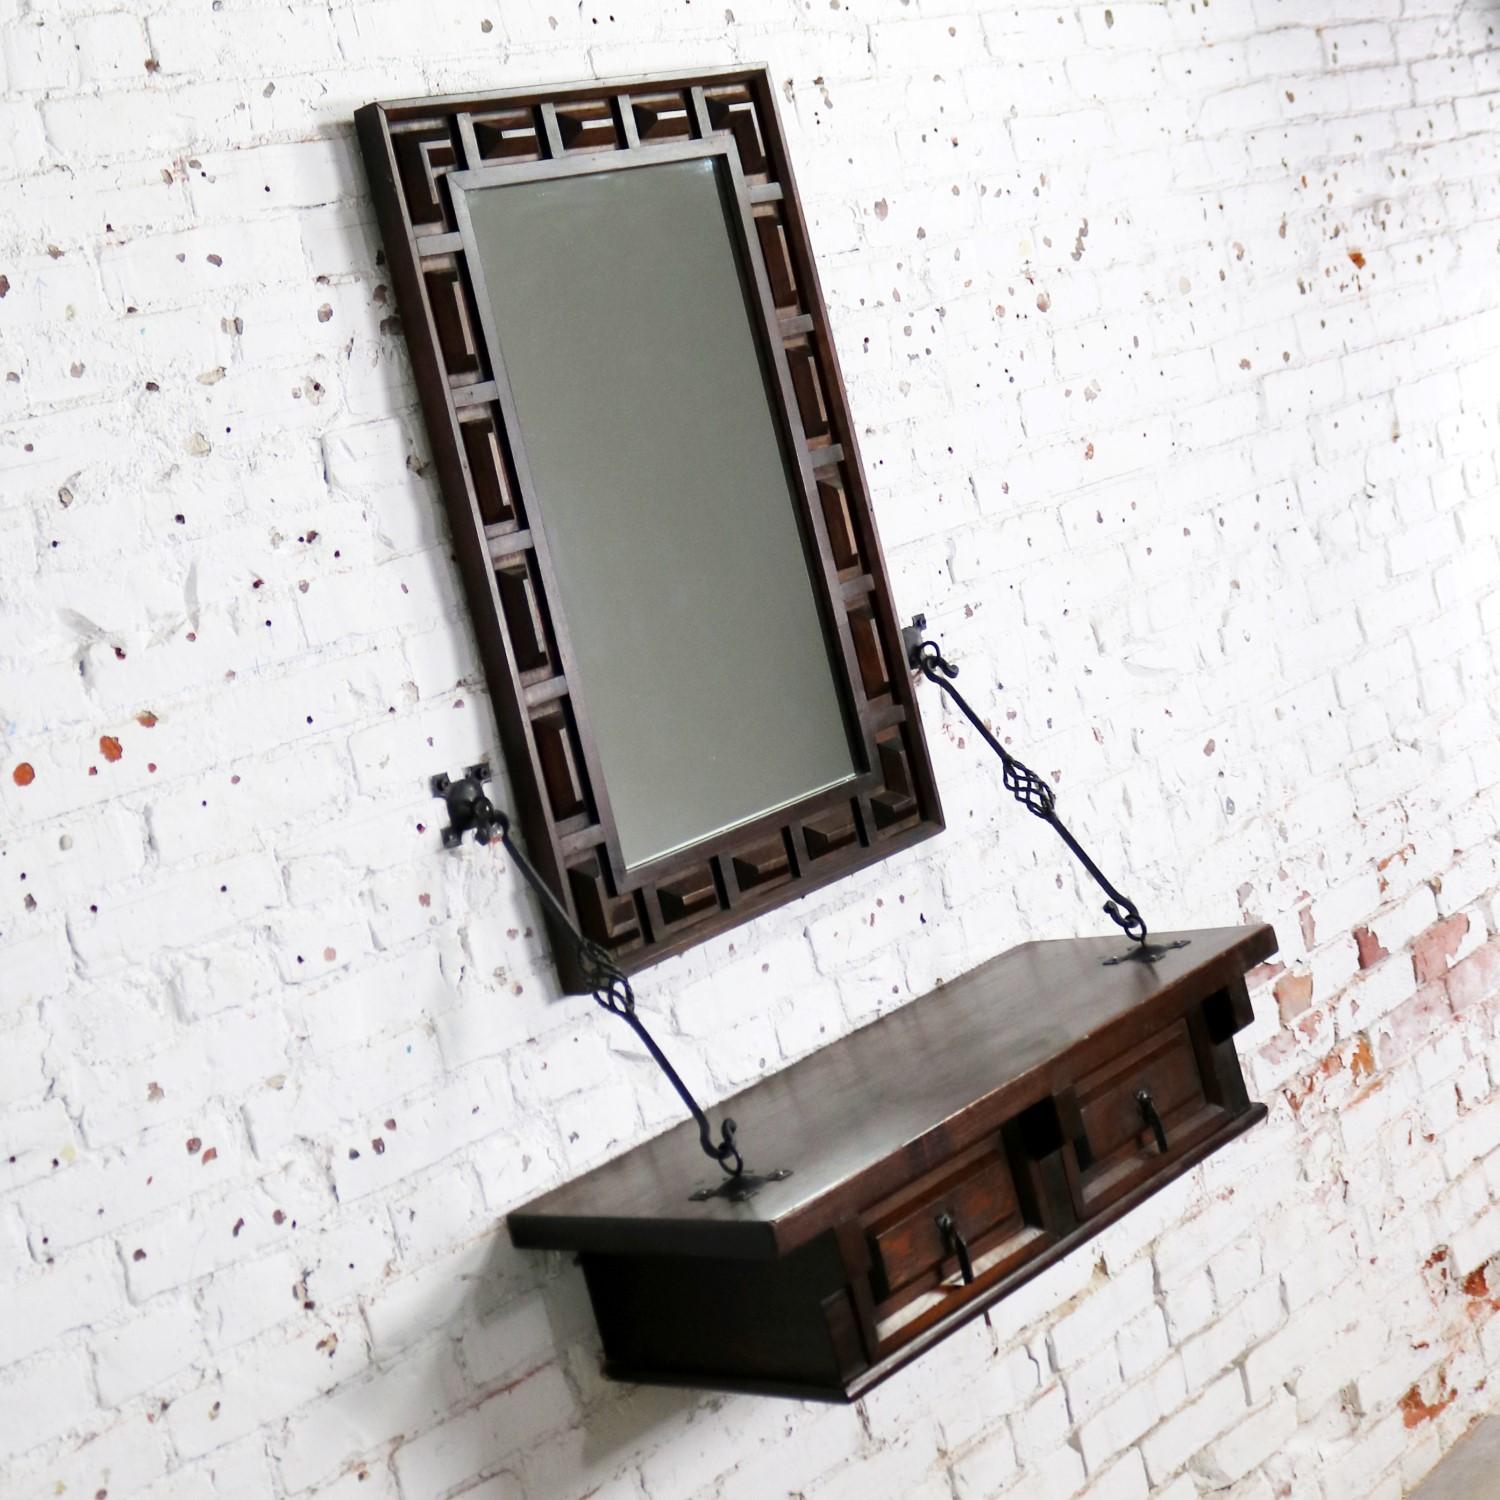 20th Century Spanish Revival Style Wall Hanging Console Table & Mirror after Artes De Mexico